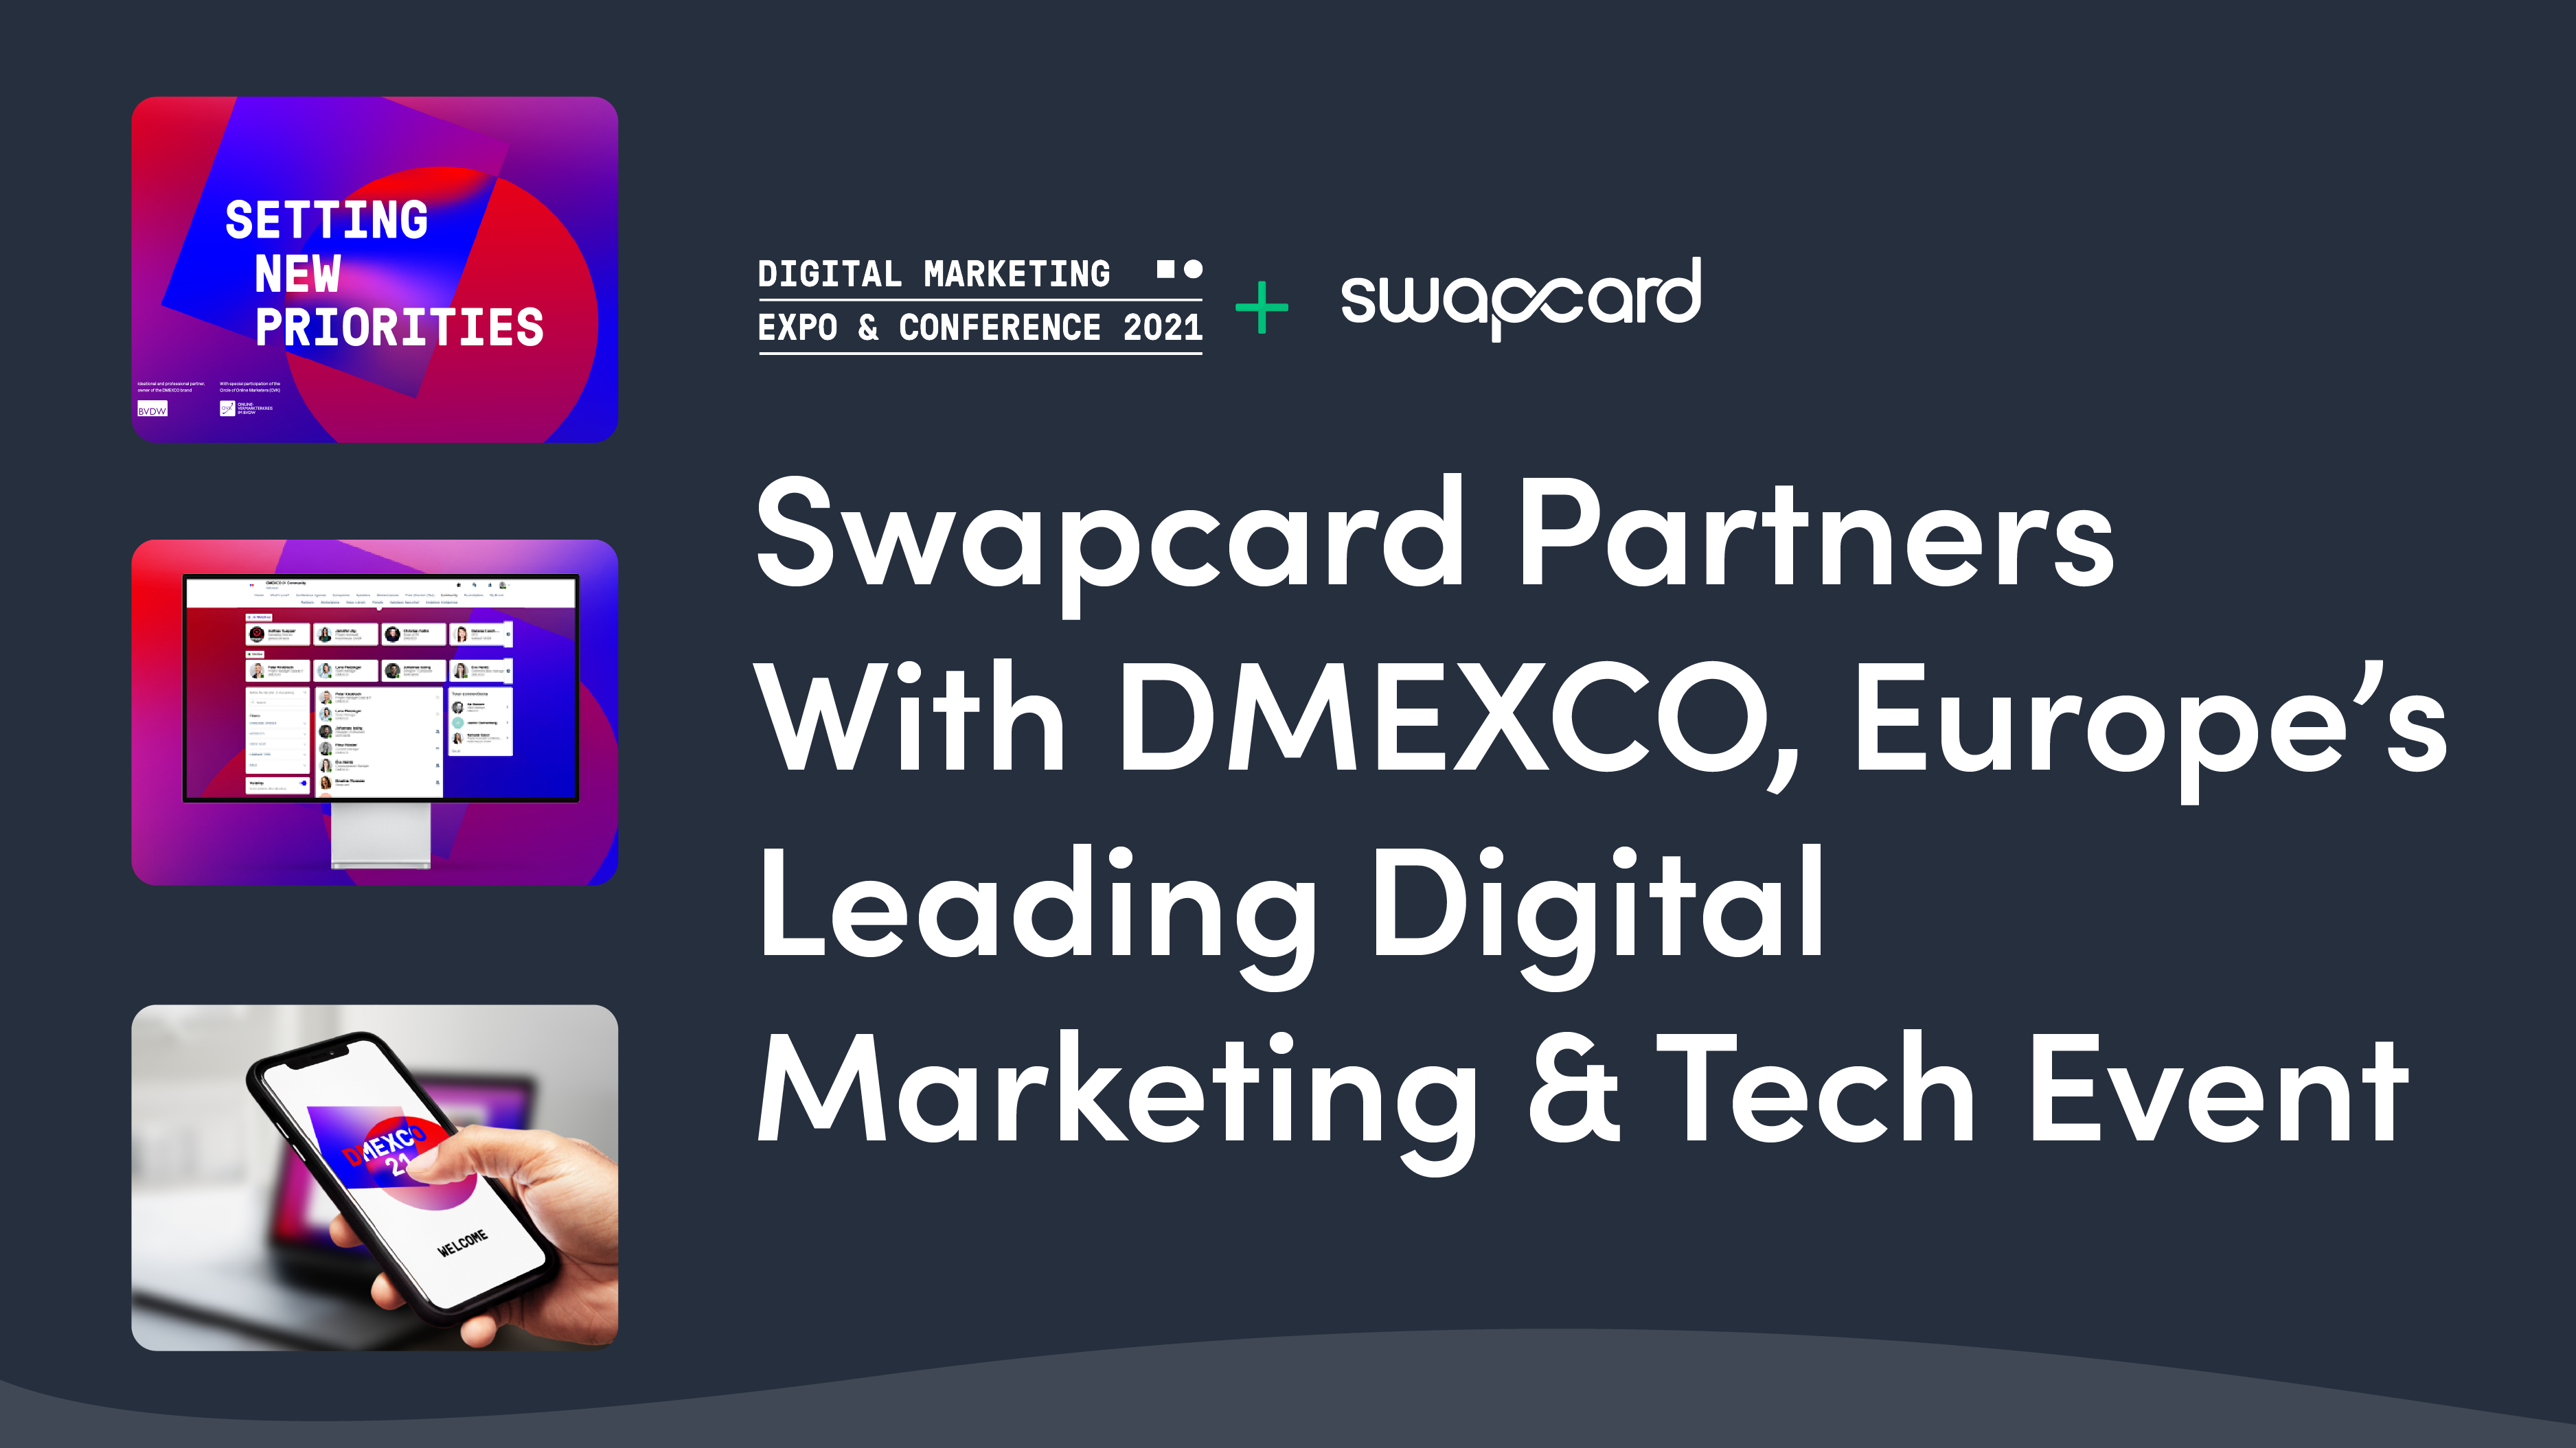 Swapcard Partners With DMEXCO, Europe’s Leading Digital Marketing & Tech Event